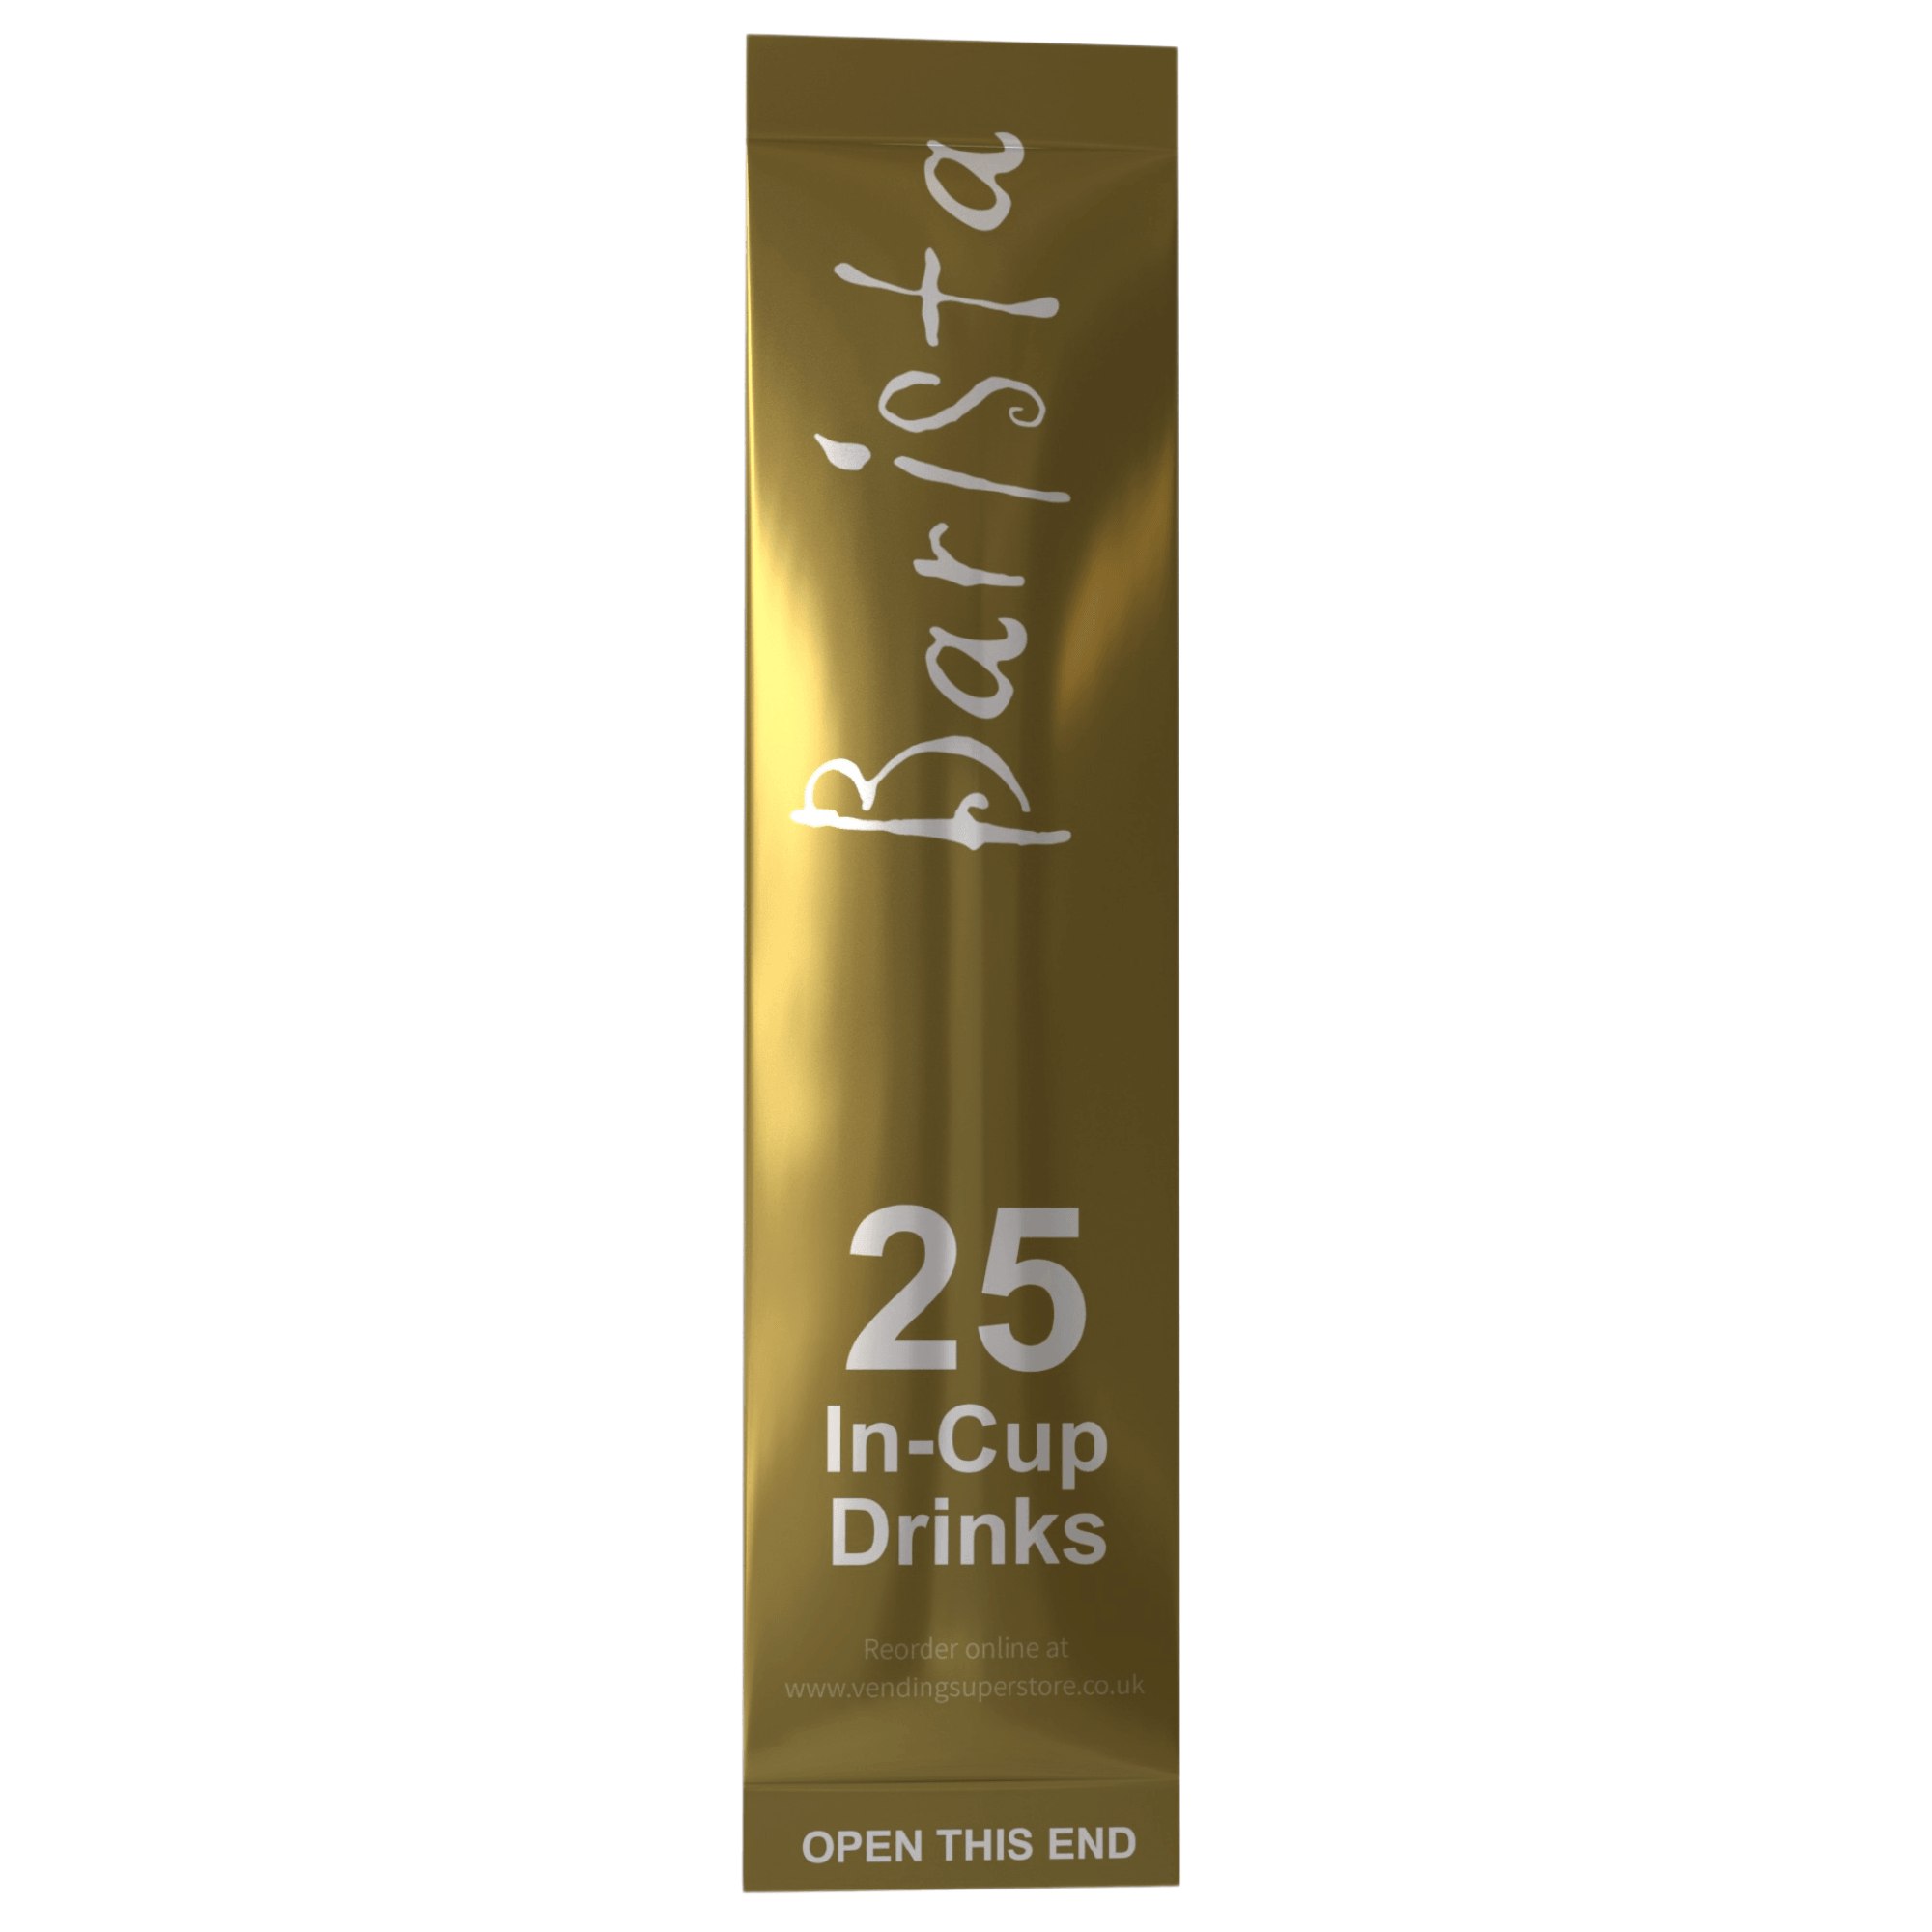 Incup Vending Drinks - Latte - Sleeve of 25 Cups - Vending Superstore